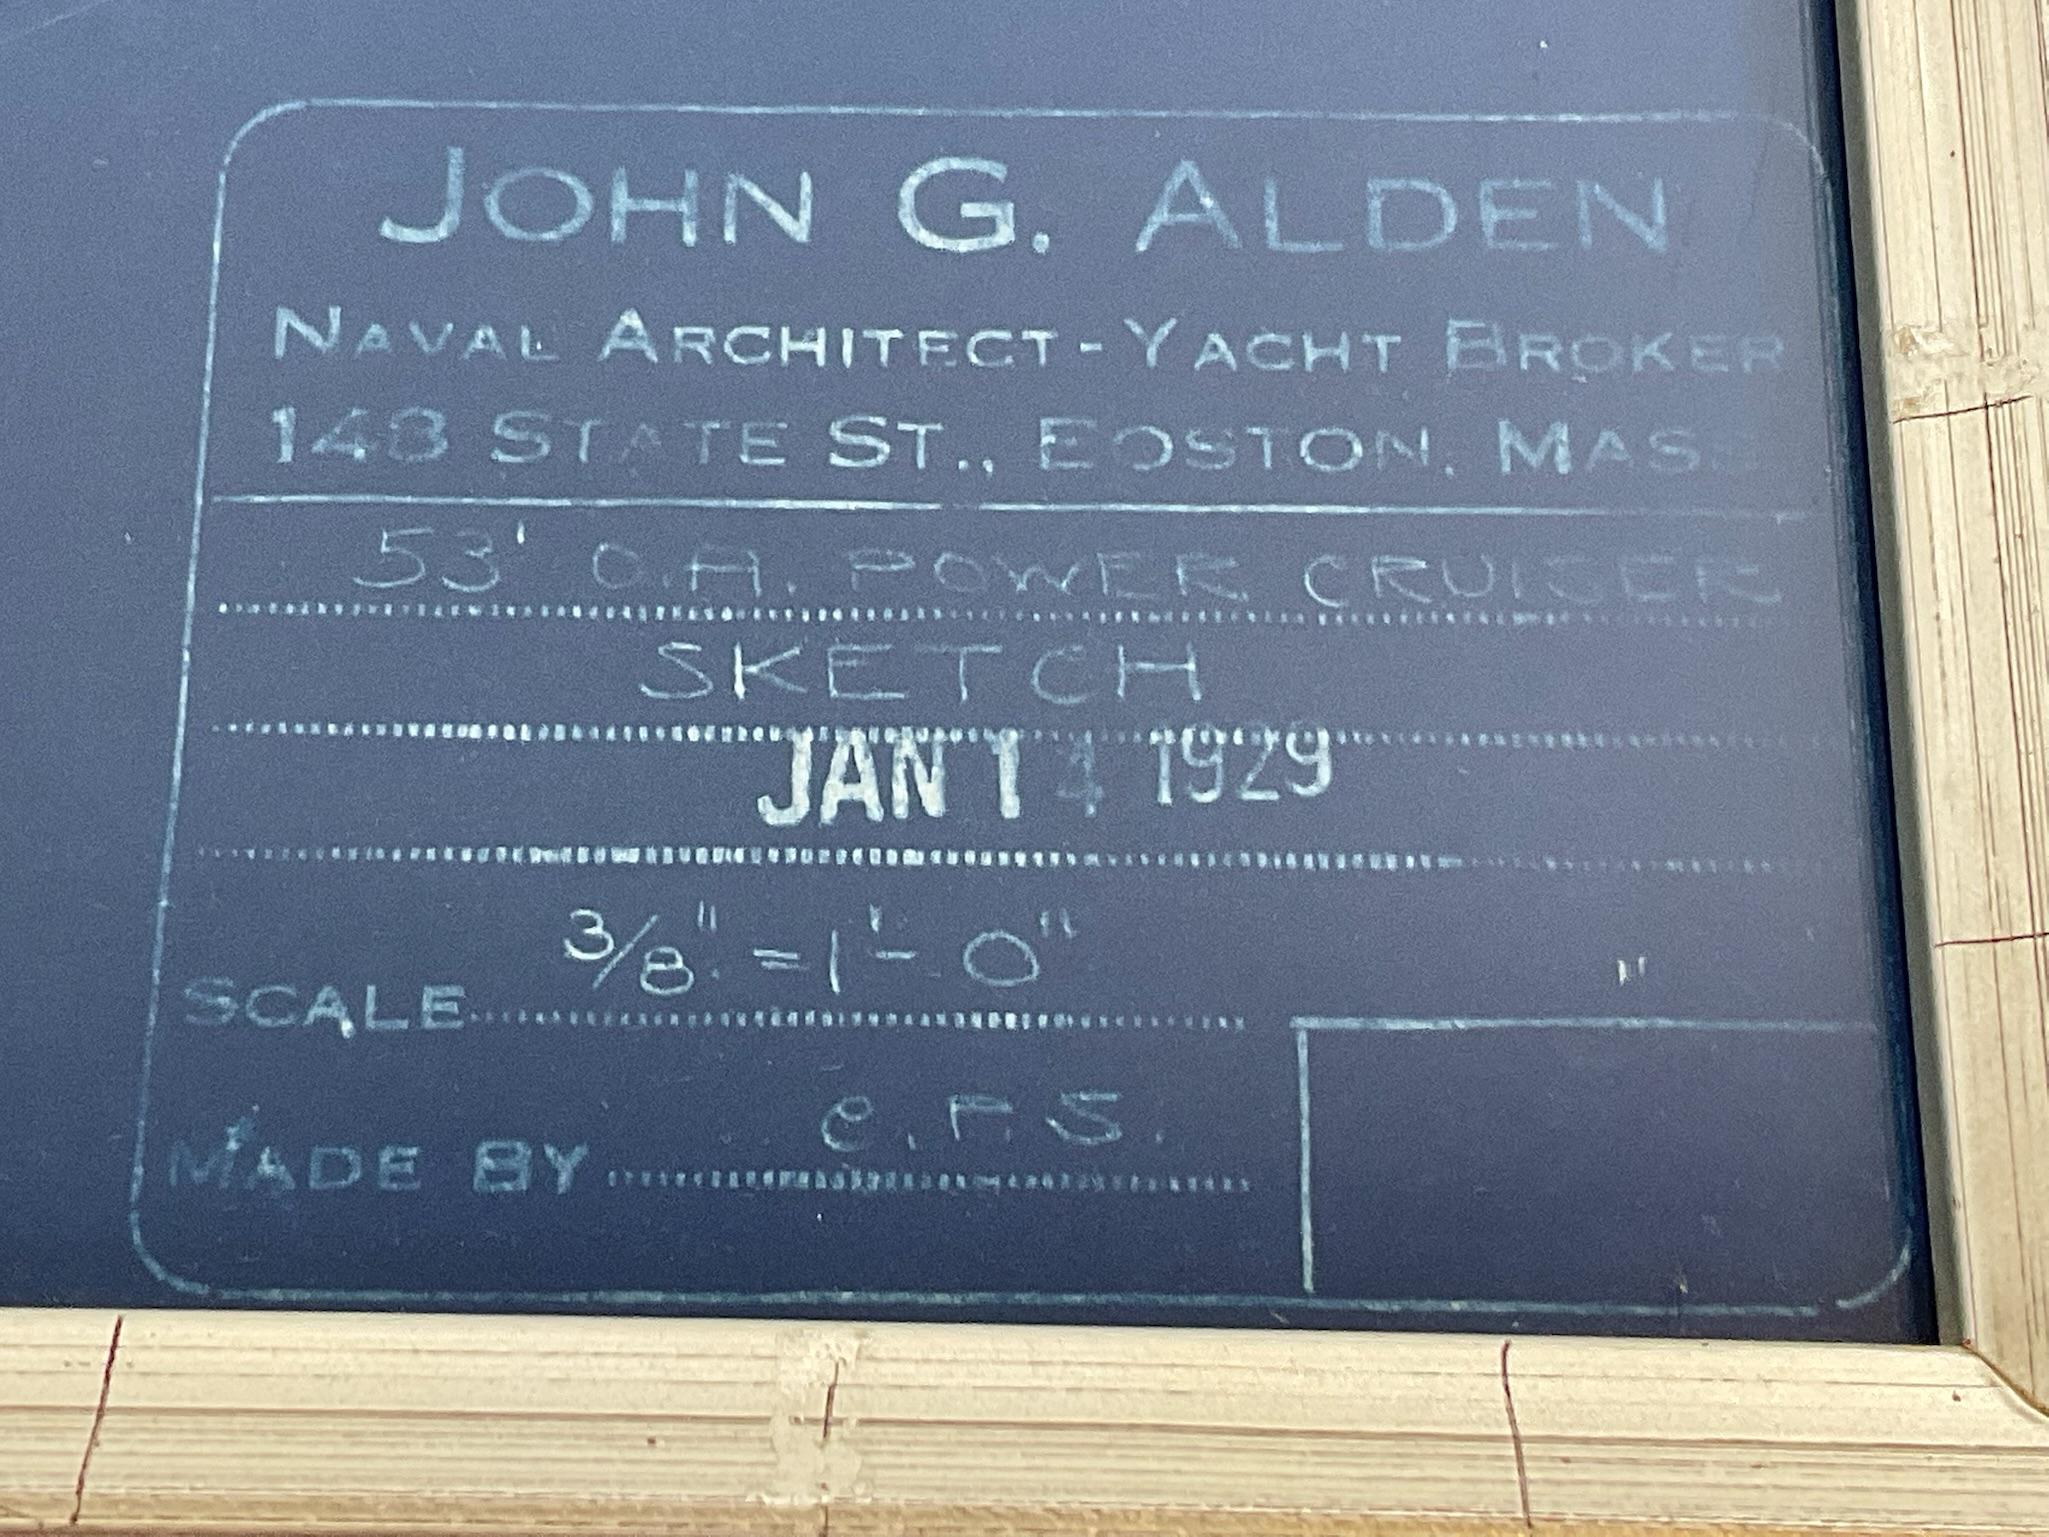 Paper Original Blueprint of a Fifty Three Foot Yacht For Sale